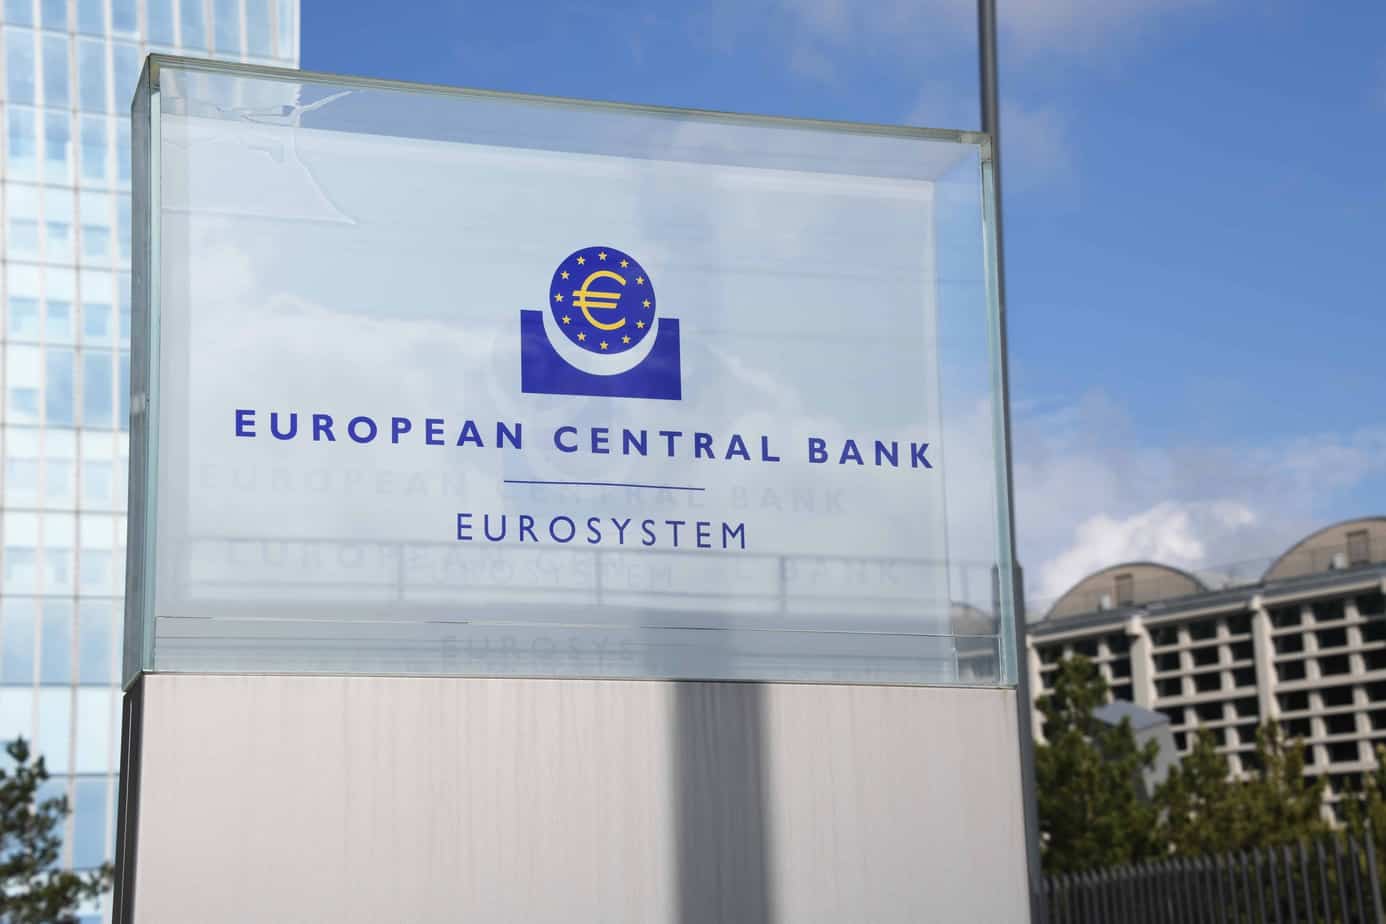 Normalisation of the ECB’s monetary policy is timely